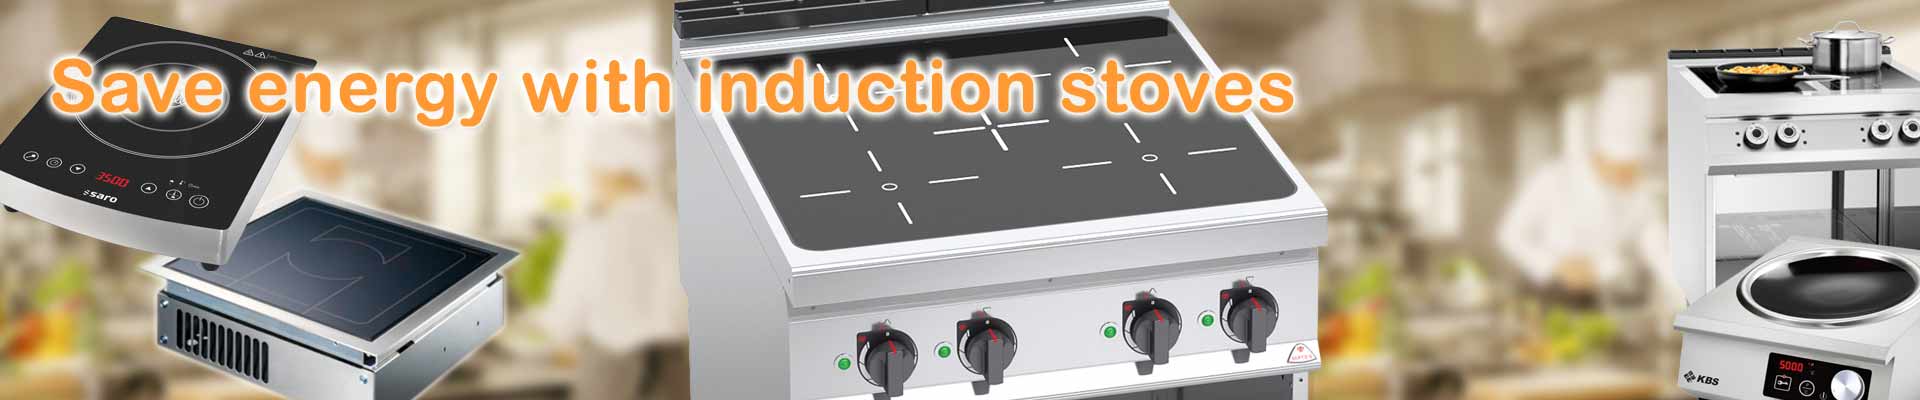 Save energy with induction stoves